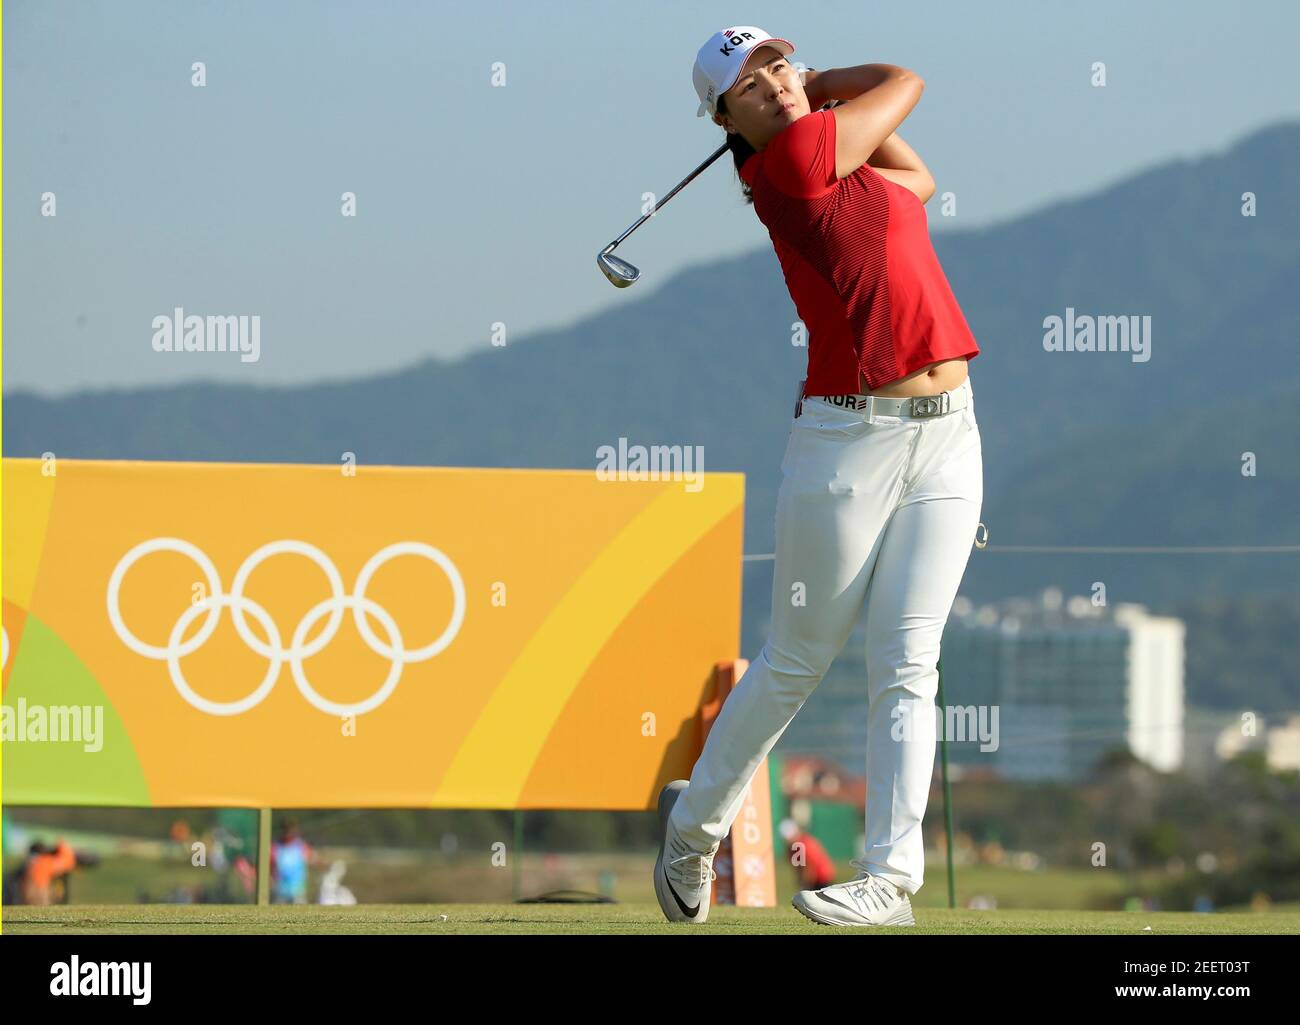 2016 Rio Olympics - Golf -  Women's Individual Stroke Play - Olympic Golf Course - Rio de Janeiro, Brazil - 17/08/2016.  In-Gee Chun (KOR) of Korea hit her tee shot during first round women's Olympic golf competition.  REUTERS/Kevin Lamarque FOR EDITORIAL USE ONLY. NOT FOR SALE FOR MARKETING OR ADVERTISING CAMPAIGNS.   Picture Supplied by Action Images Stock Photo